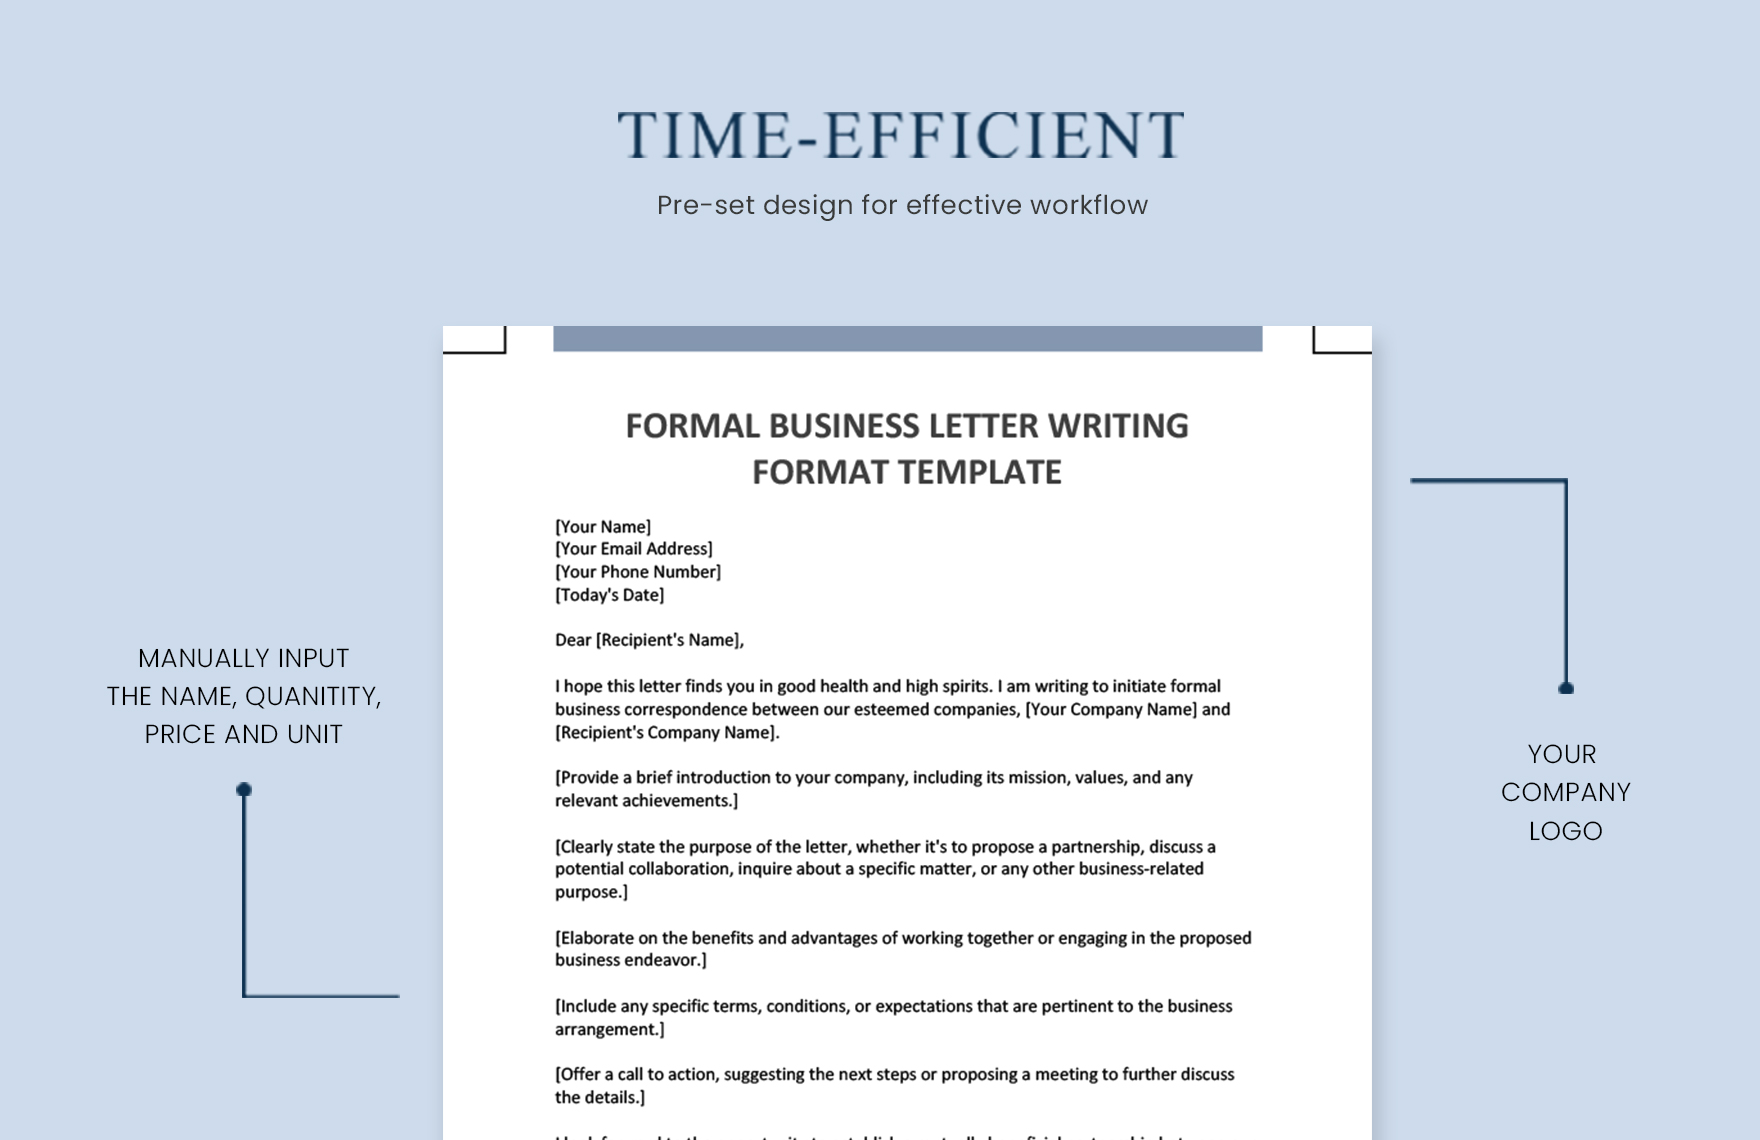 Formal Business Letter Writing Format Template